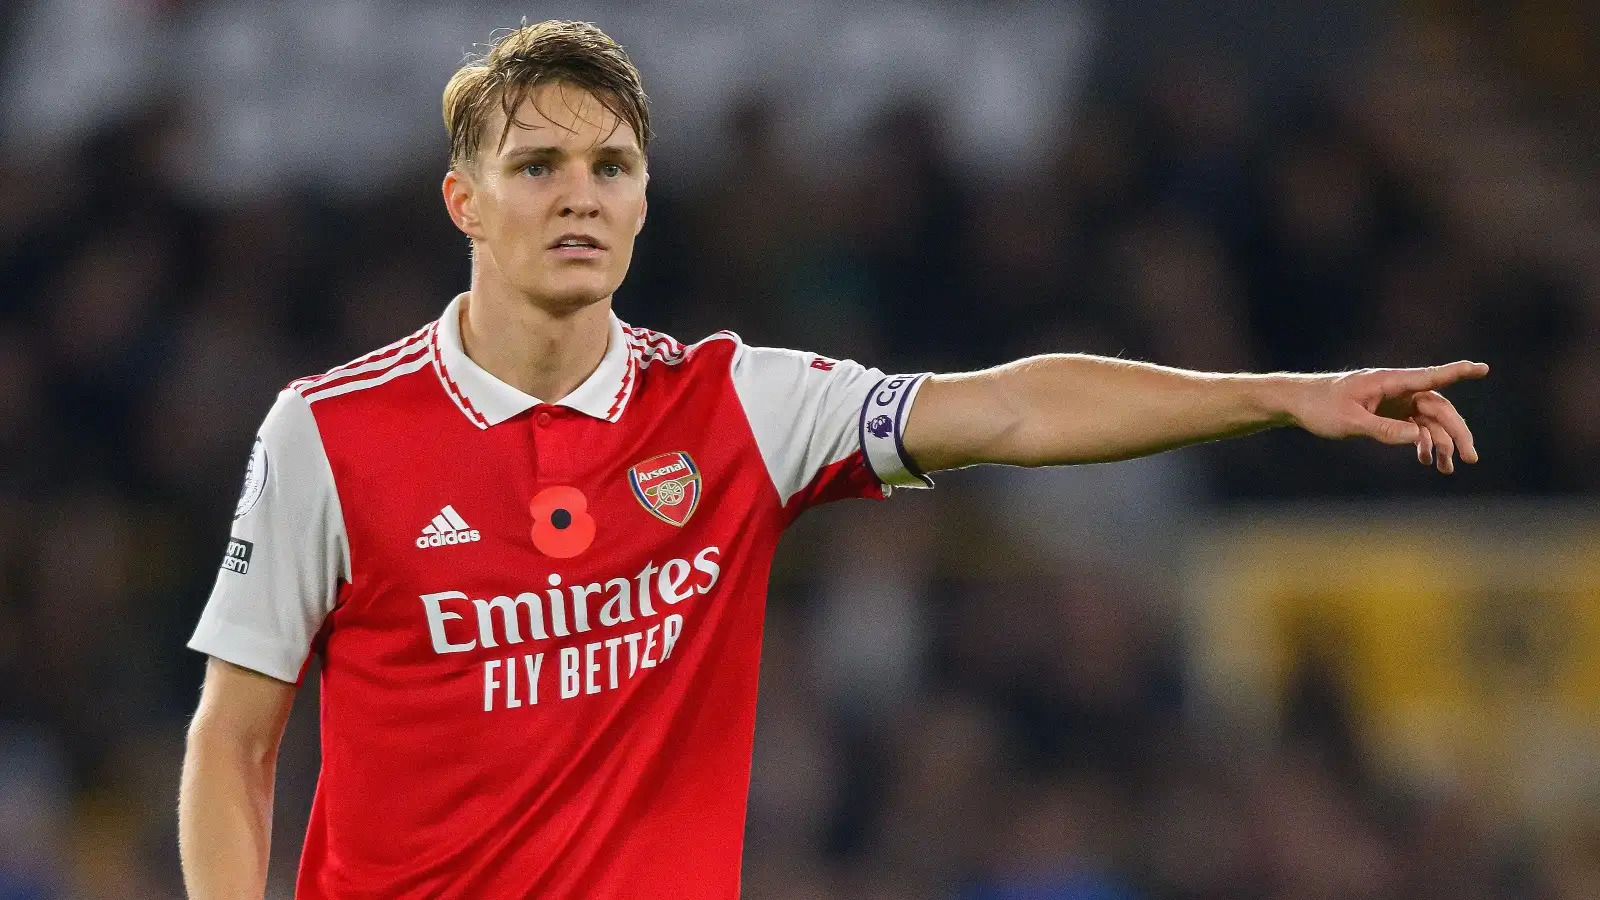 Watch: Arsenal’s Martin Odegaard scores the most outrageous free-kick